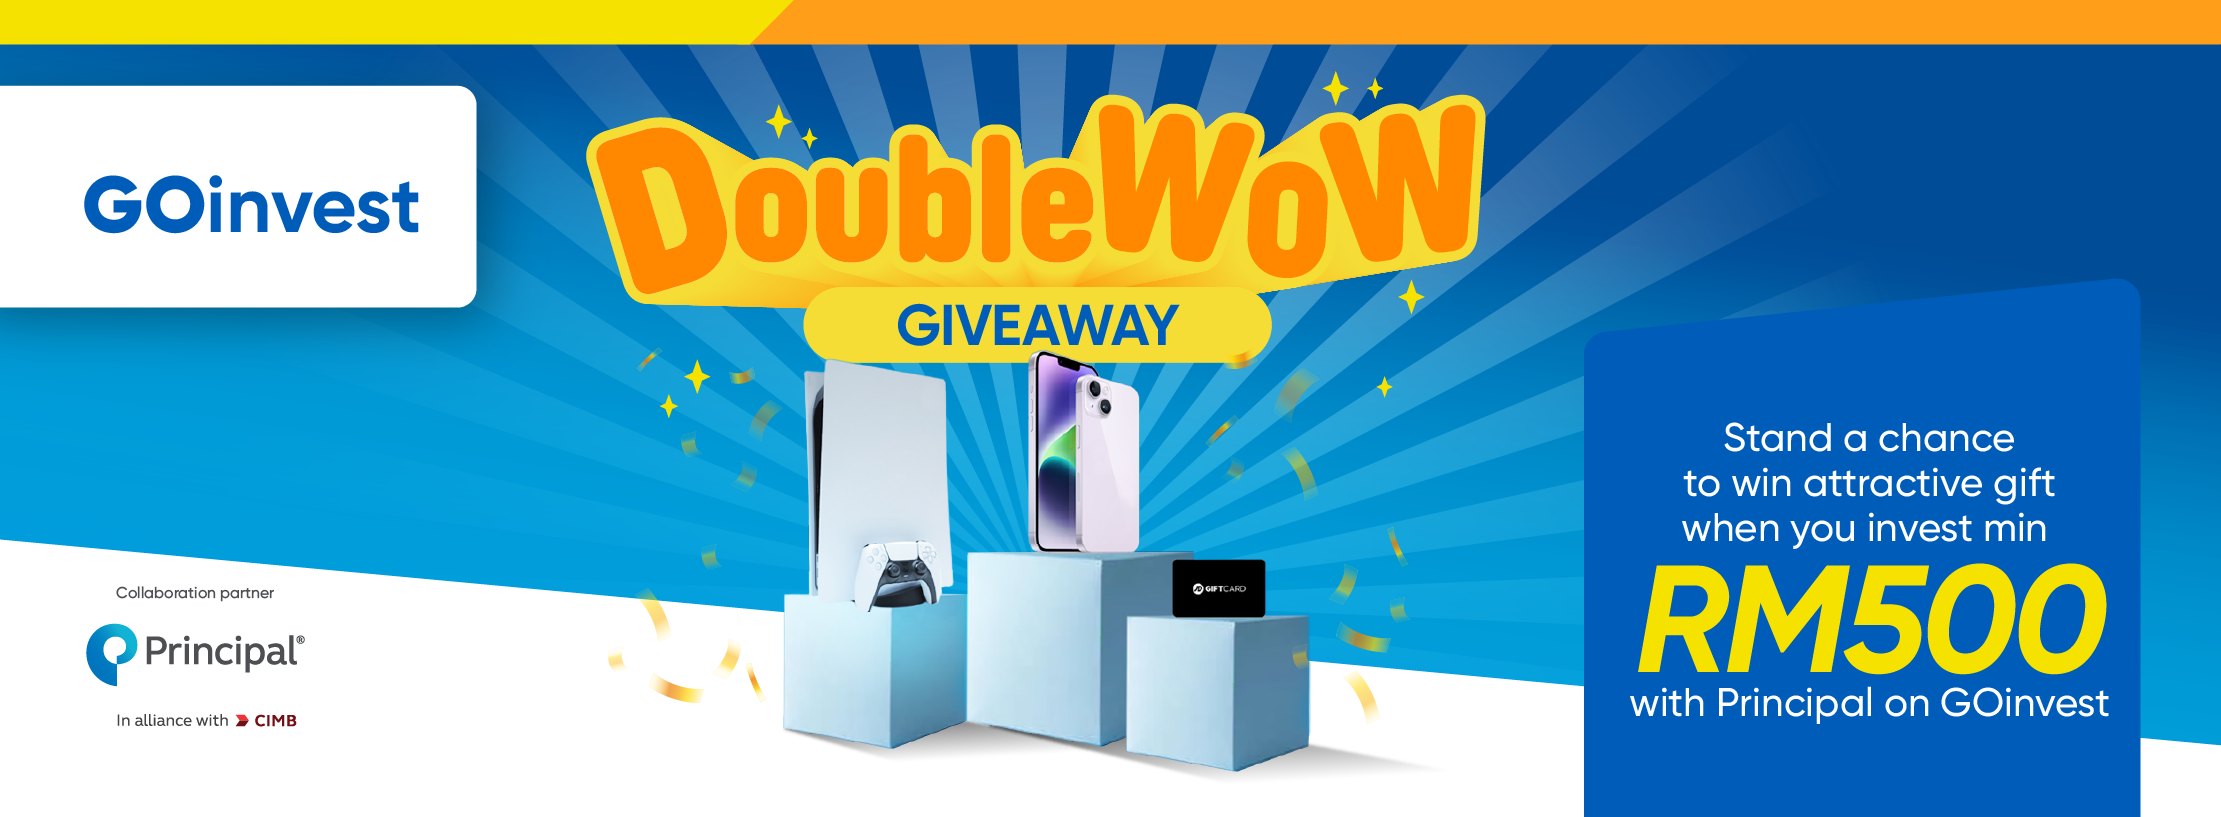 GOinvest_DoubleWOW_Web_Banner.png